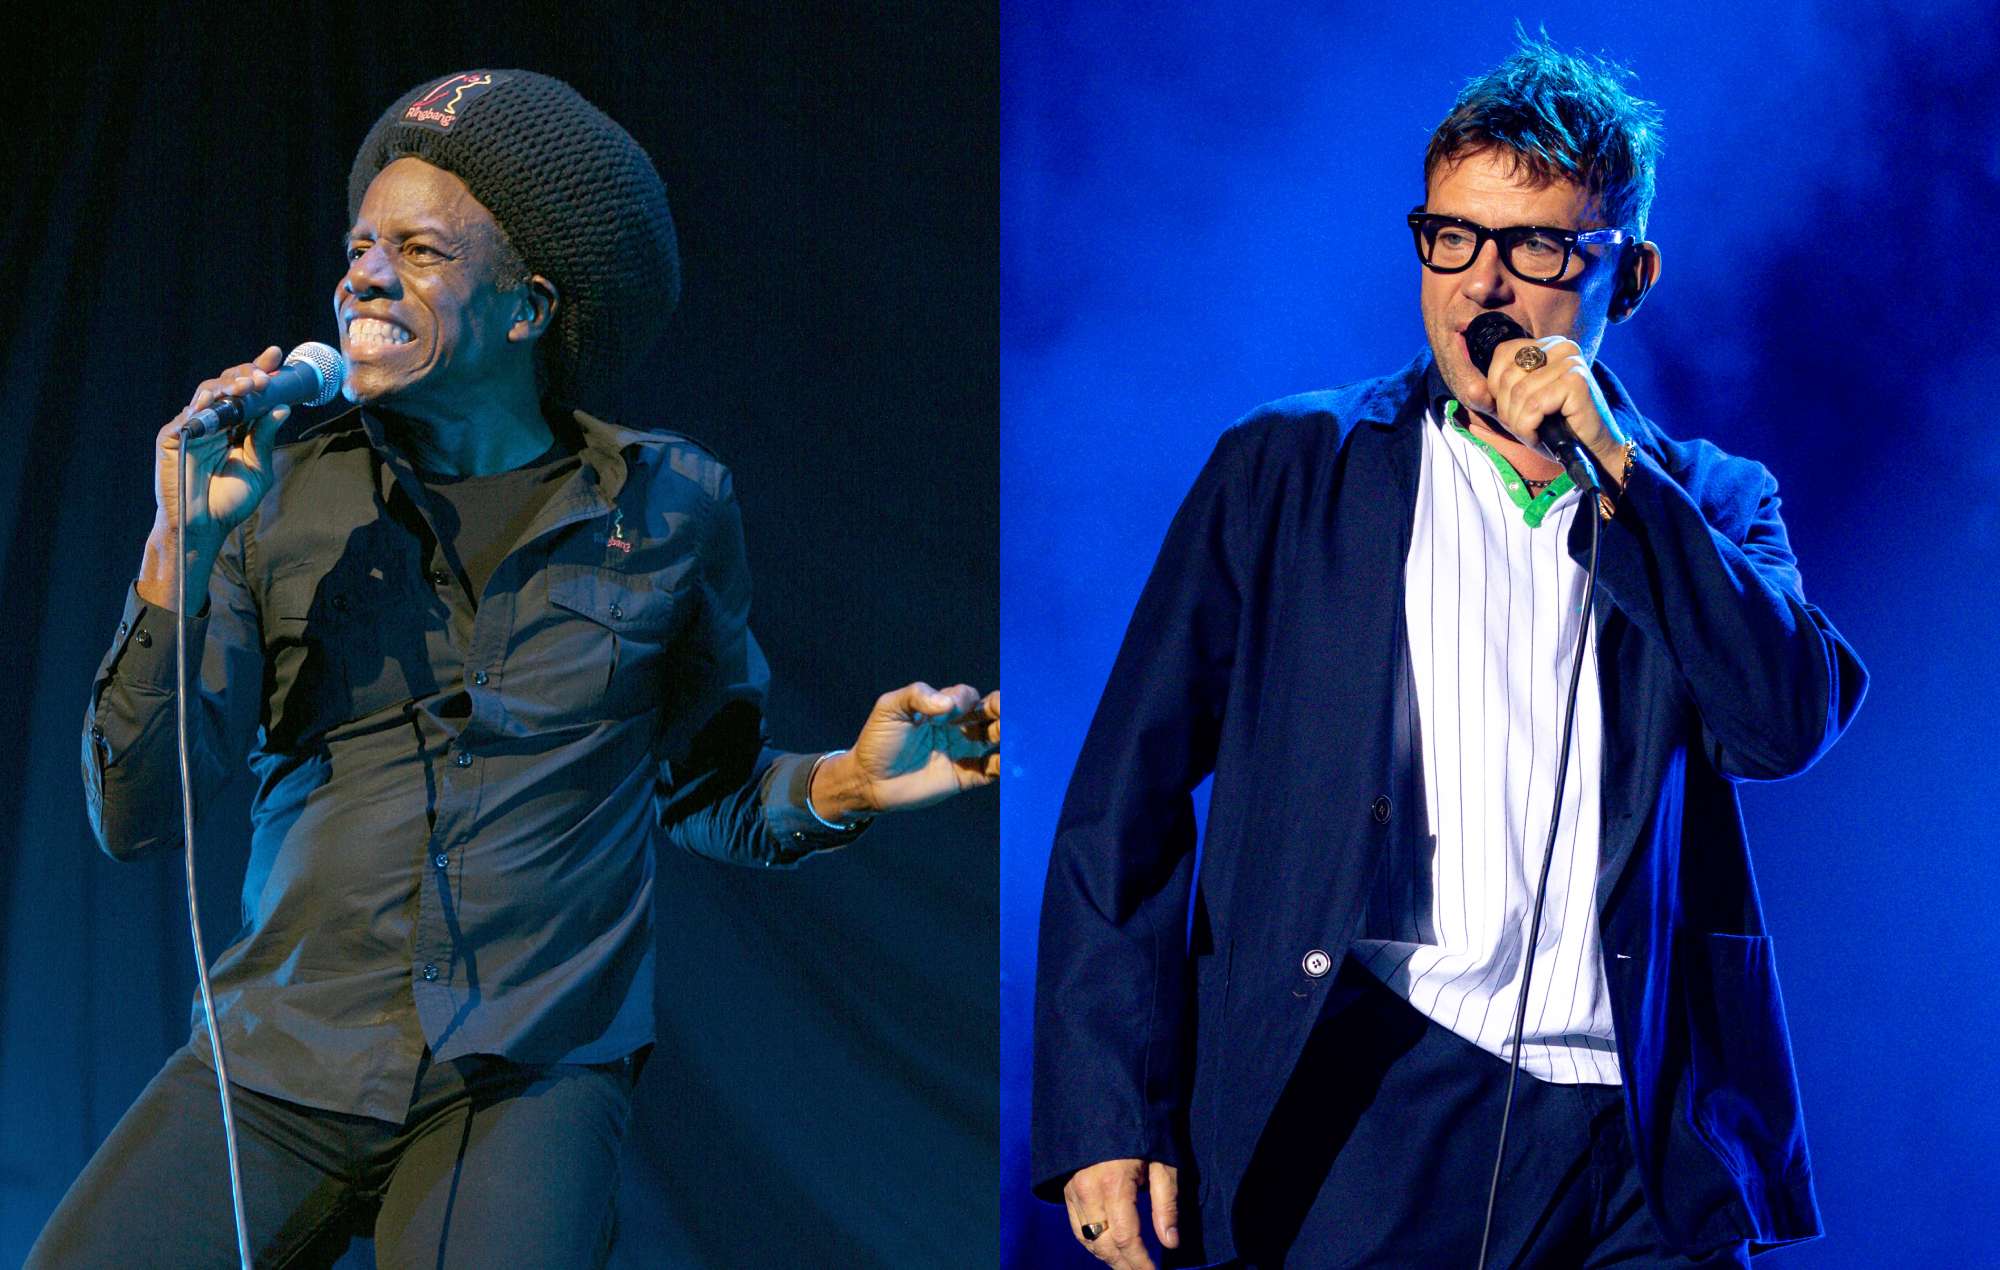 Eddy Grant says he felt “thrown under the bus” when he accused Gorillaz of copying ‘Time Warp’ on ‘Stylo’